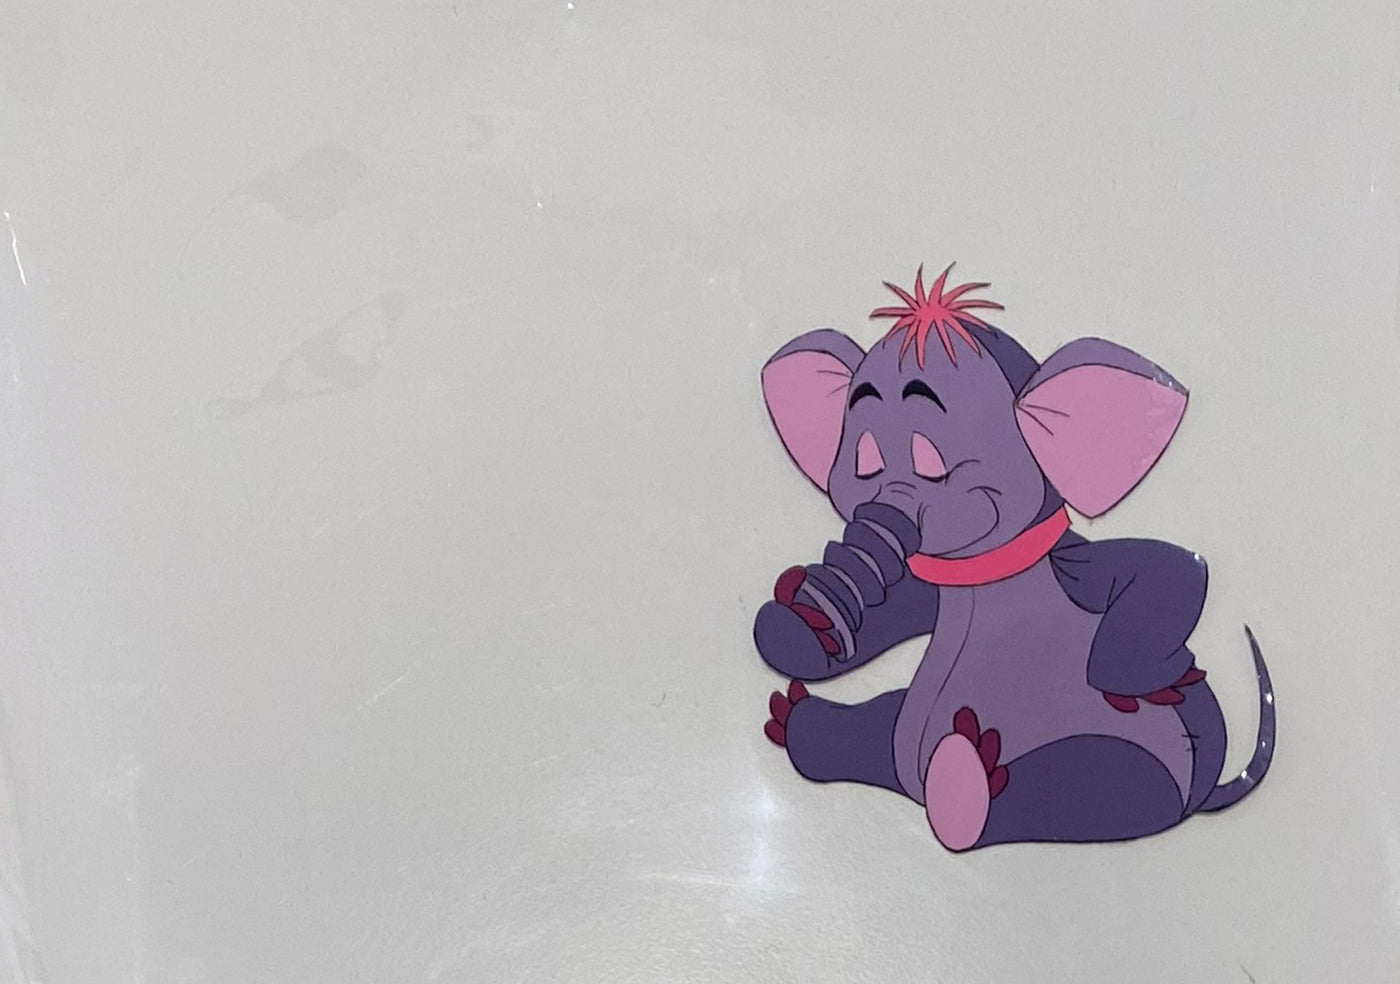 Original Walt Disney Production Cel from The Many Adventures of Winnie the Pooh featuring Heffalump